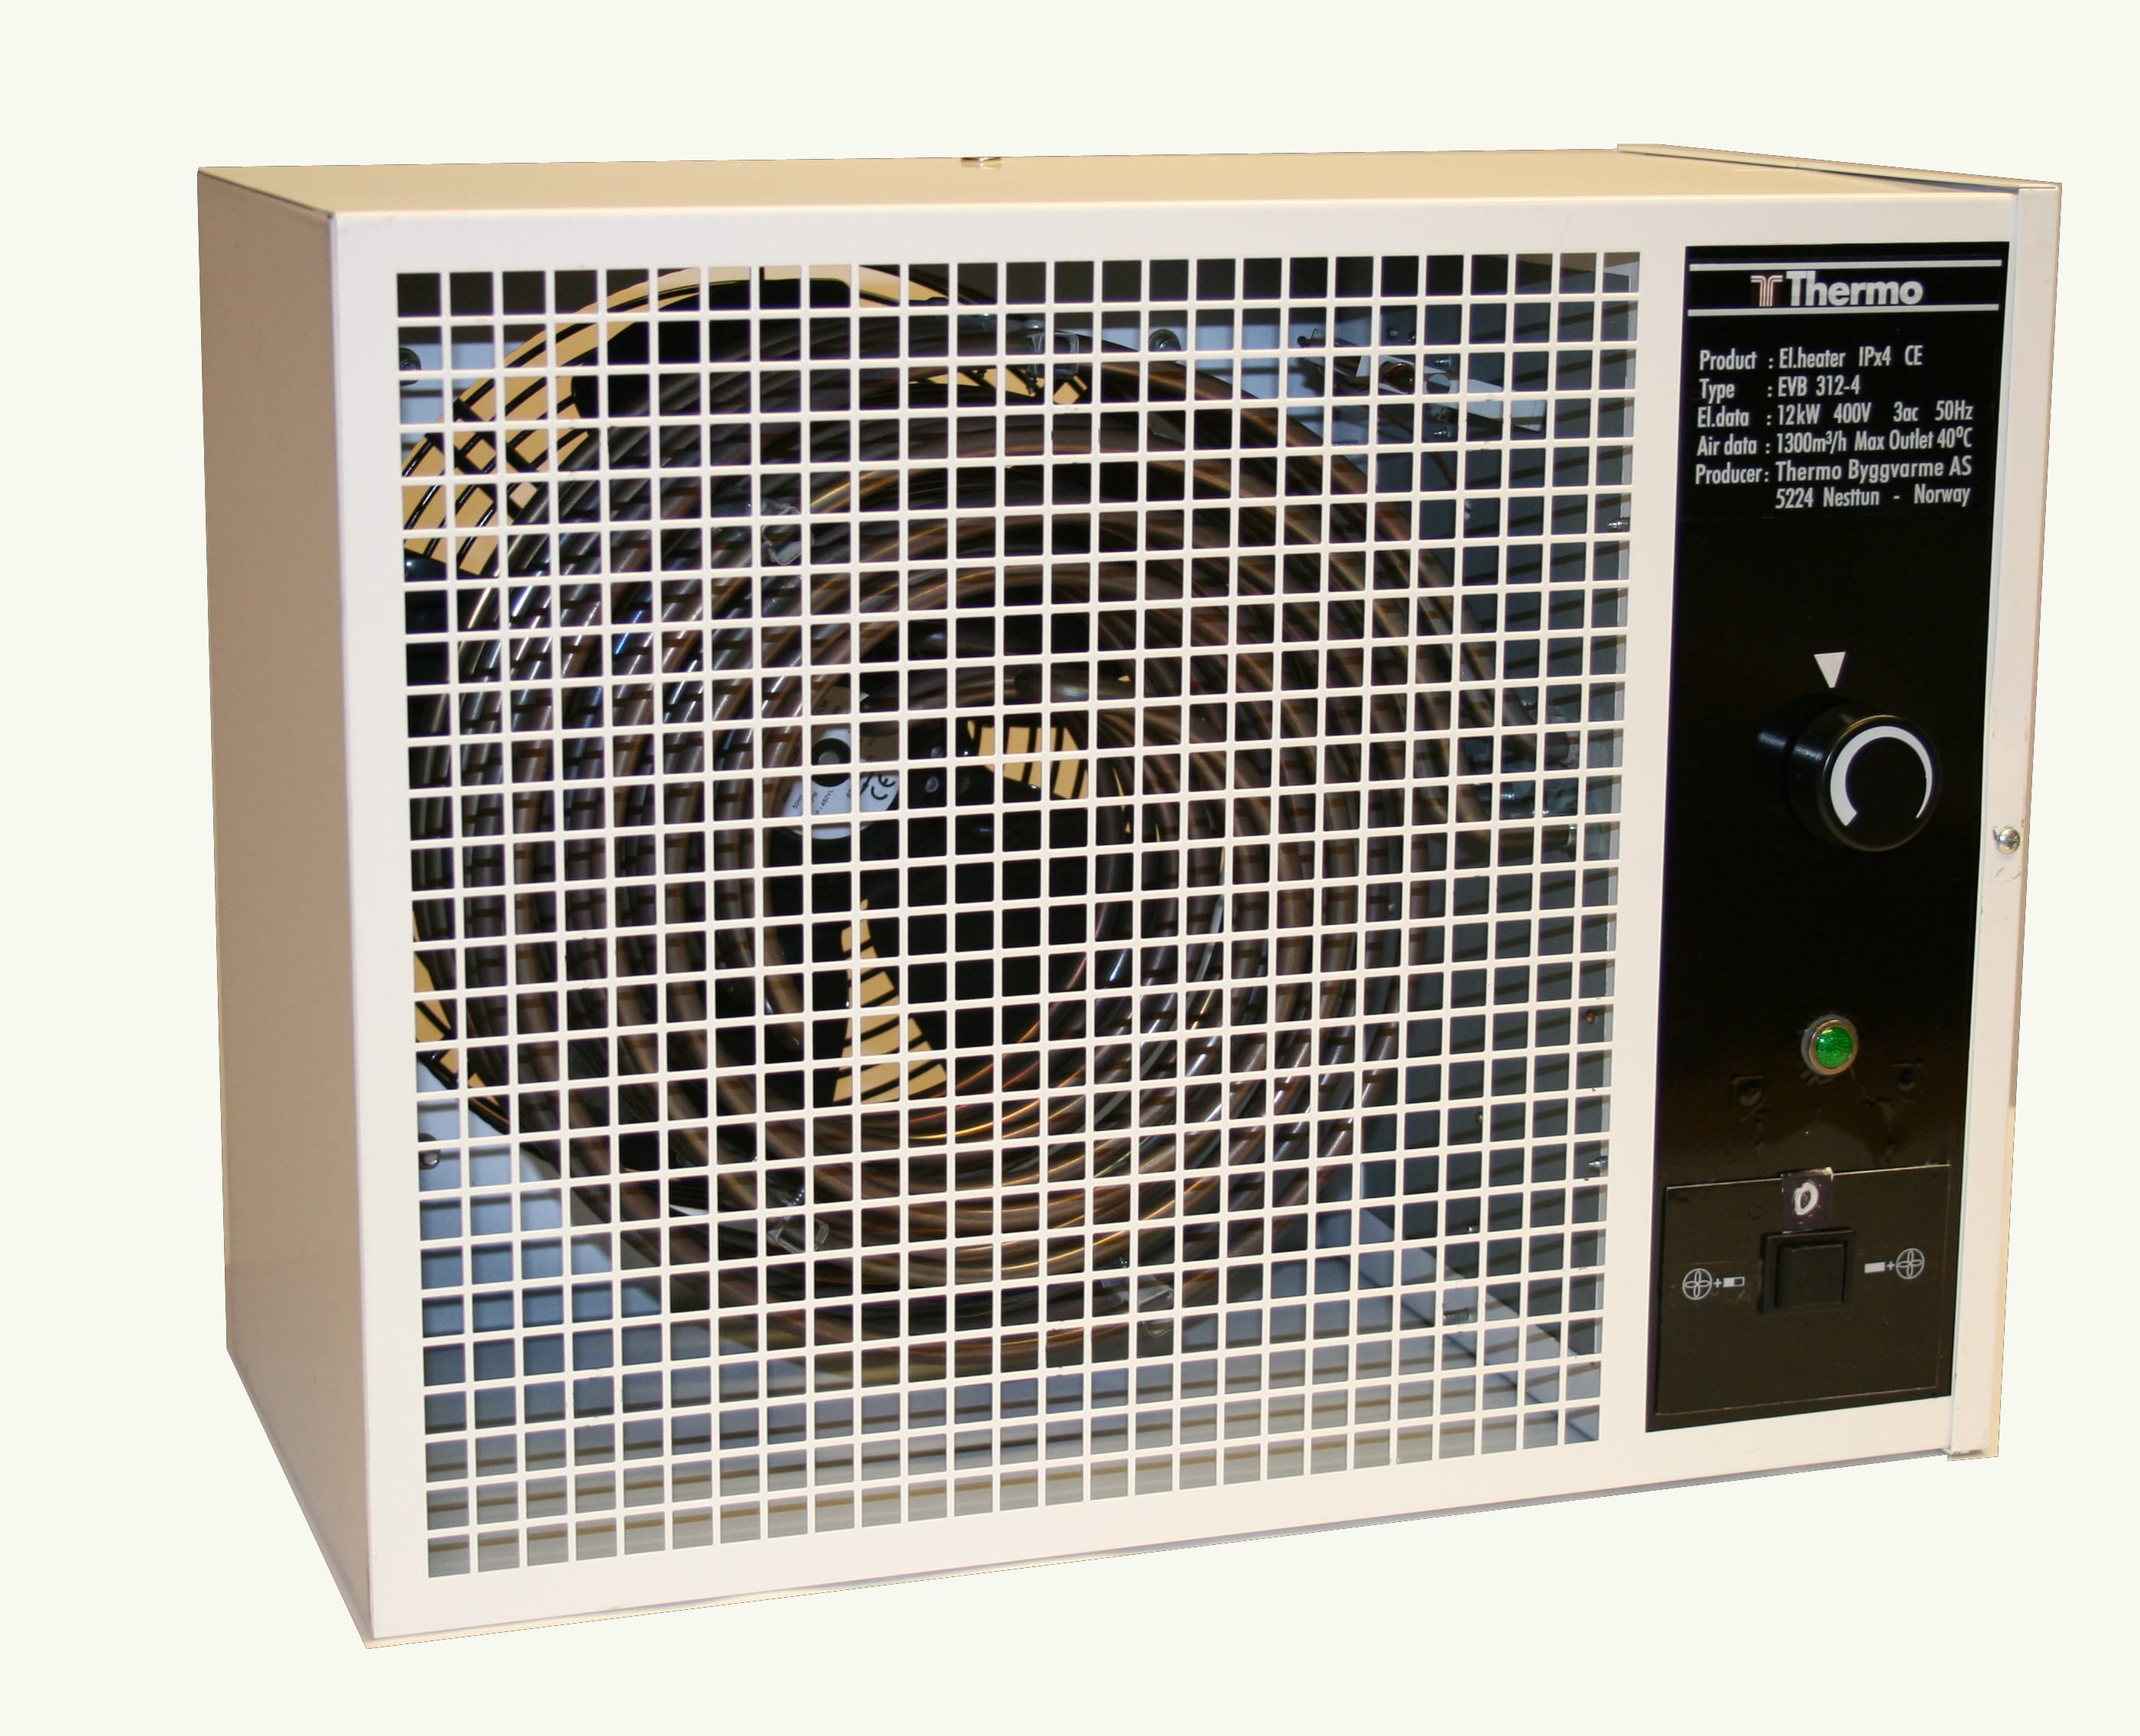 Thermo AS - EVB 303-4 3kW/400V/3N